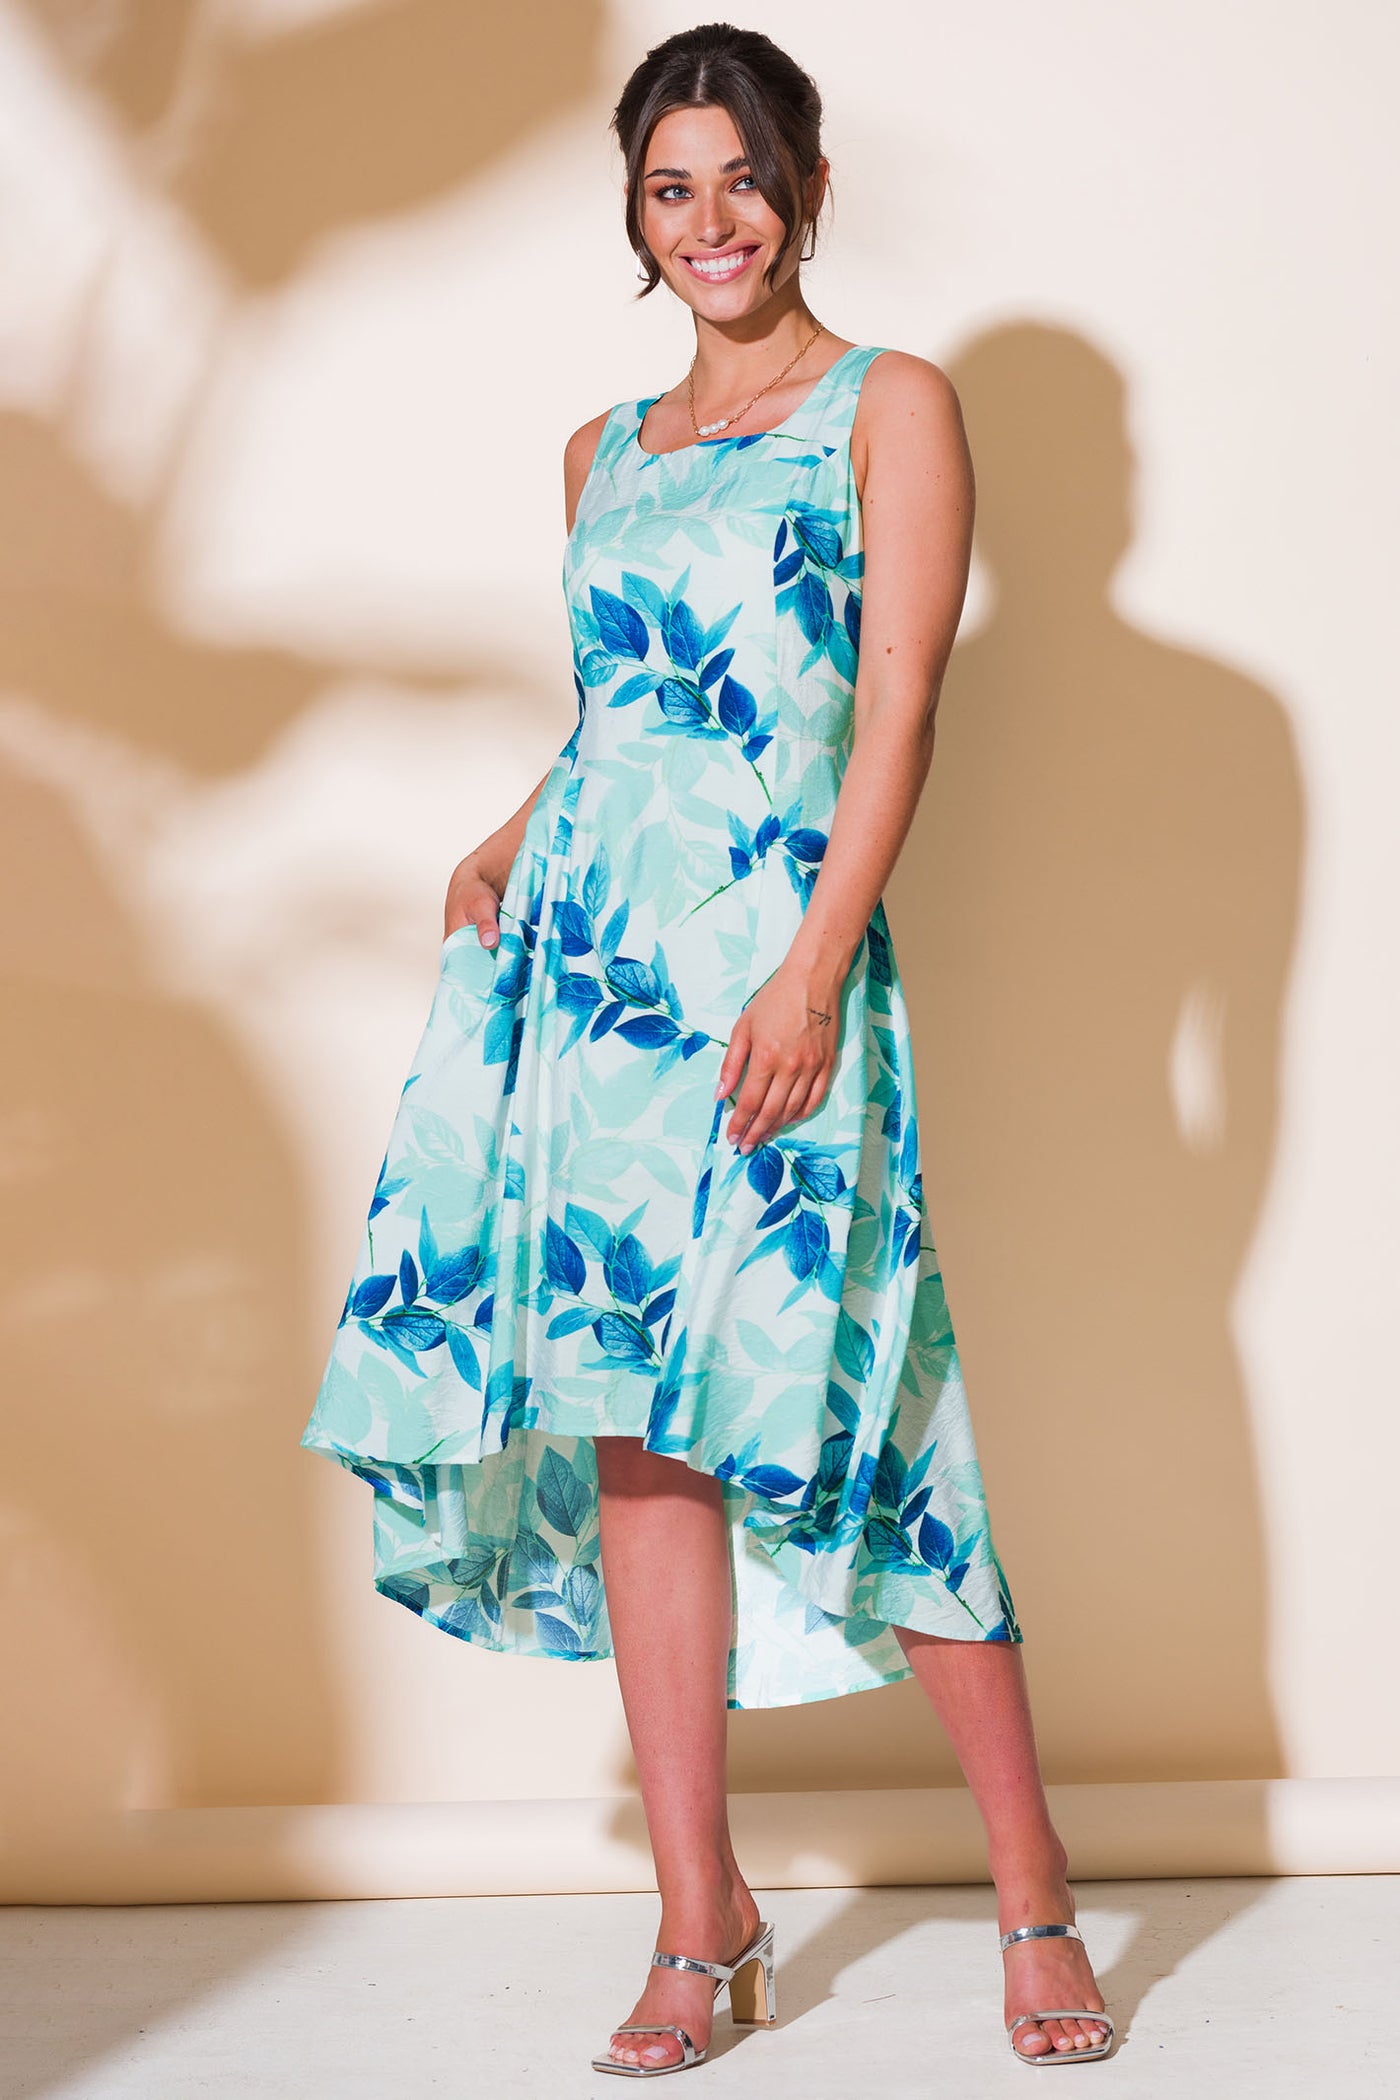 Alison Sheri A43118 Blue Leaf Print High Low Sleeveless Dress - Rouge Boutique Inverness